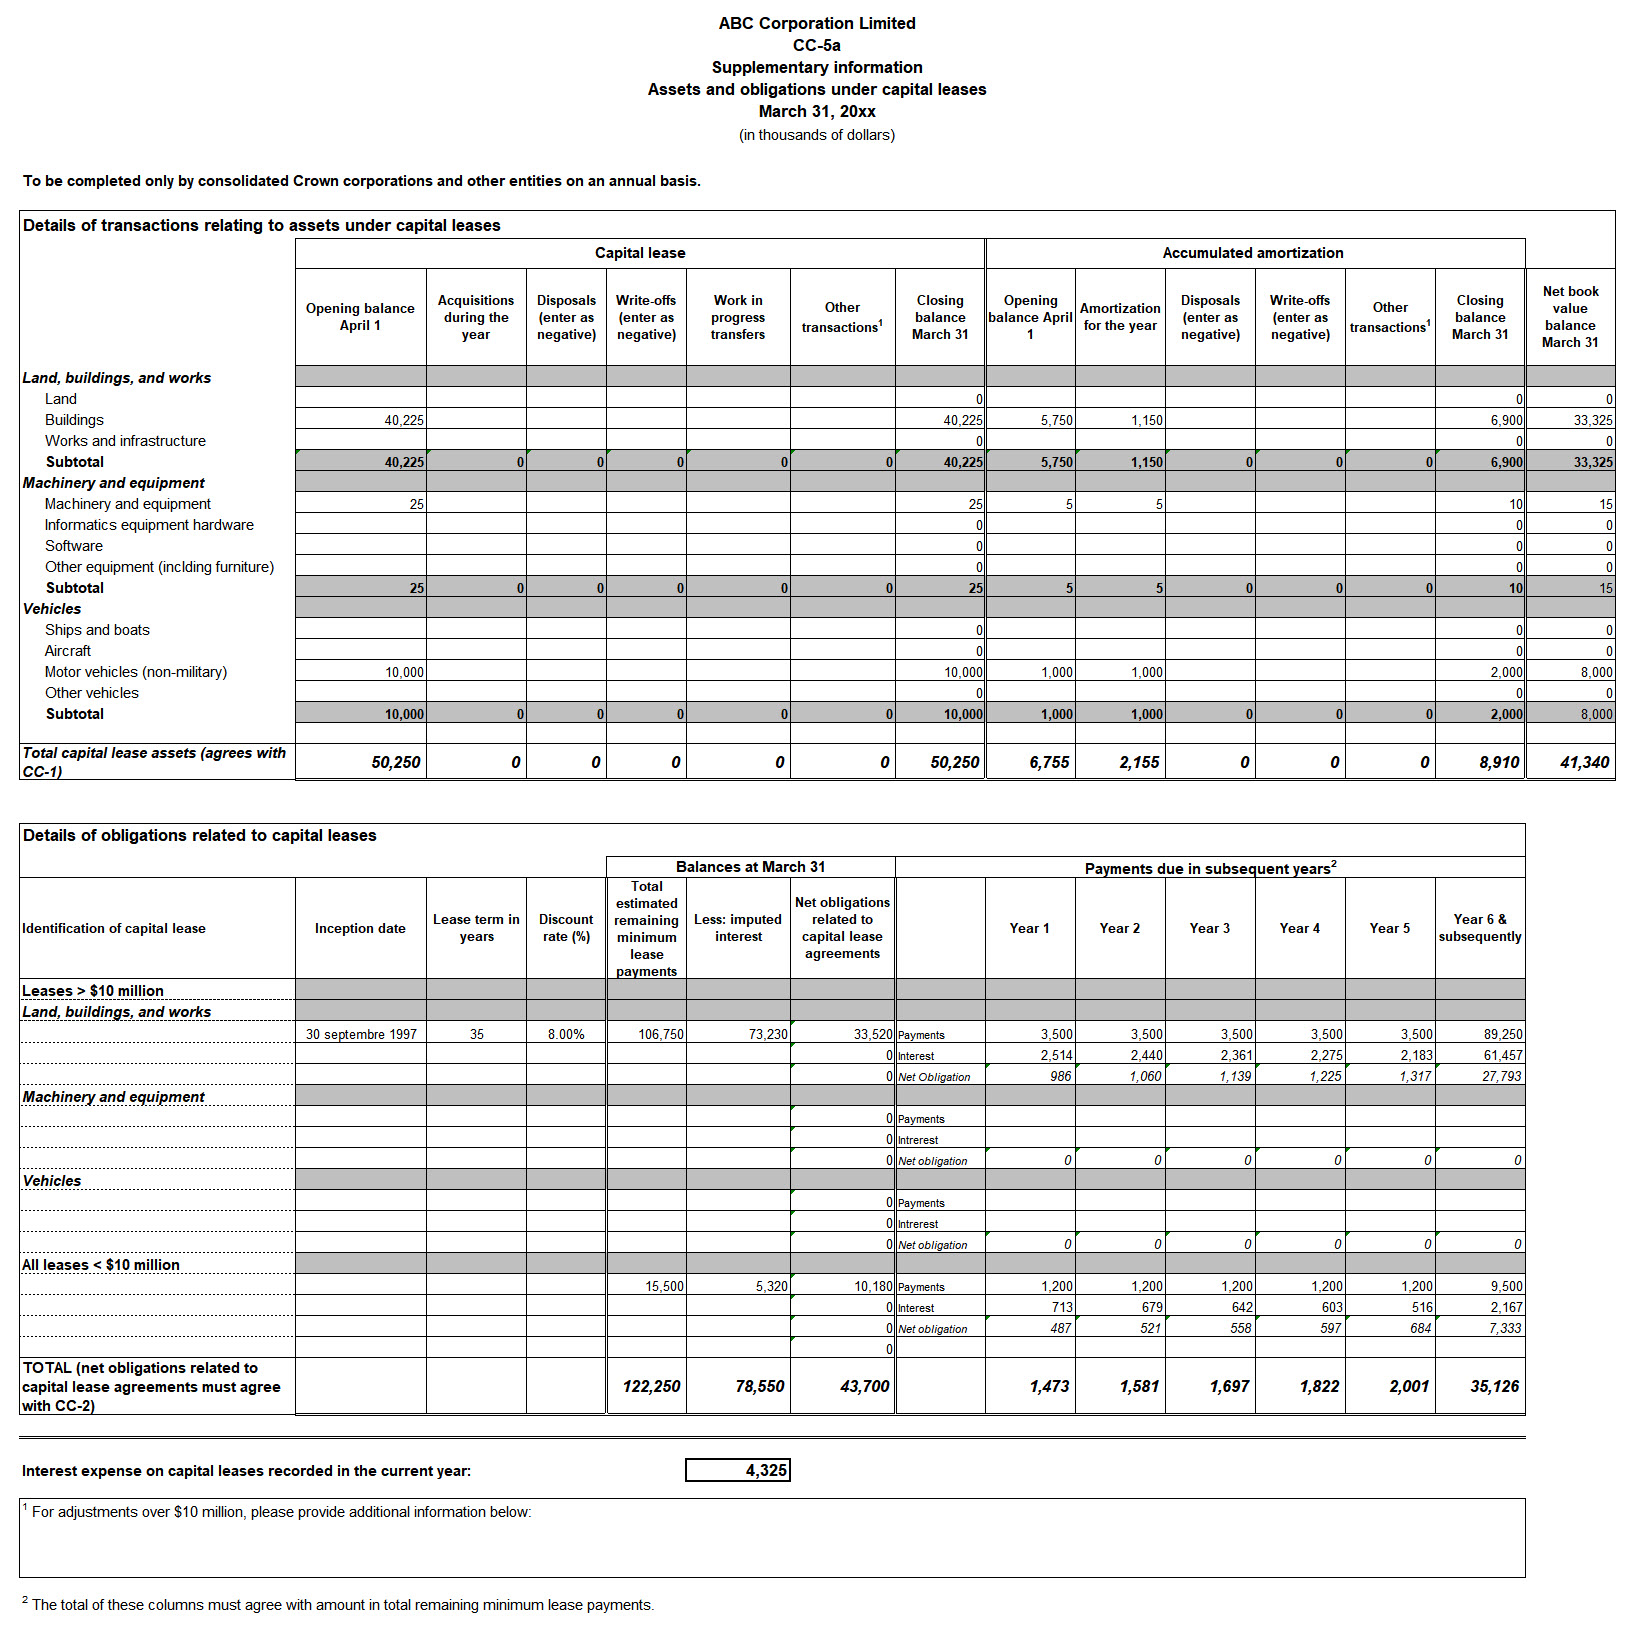 Screen capture of Form CC-5a: Assets and obligations under capital leases - Text version below the image